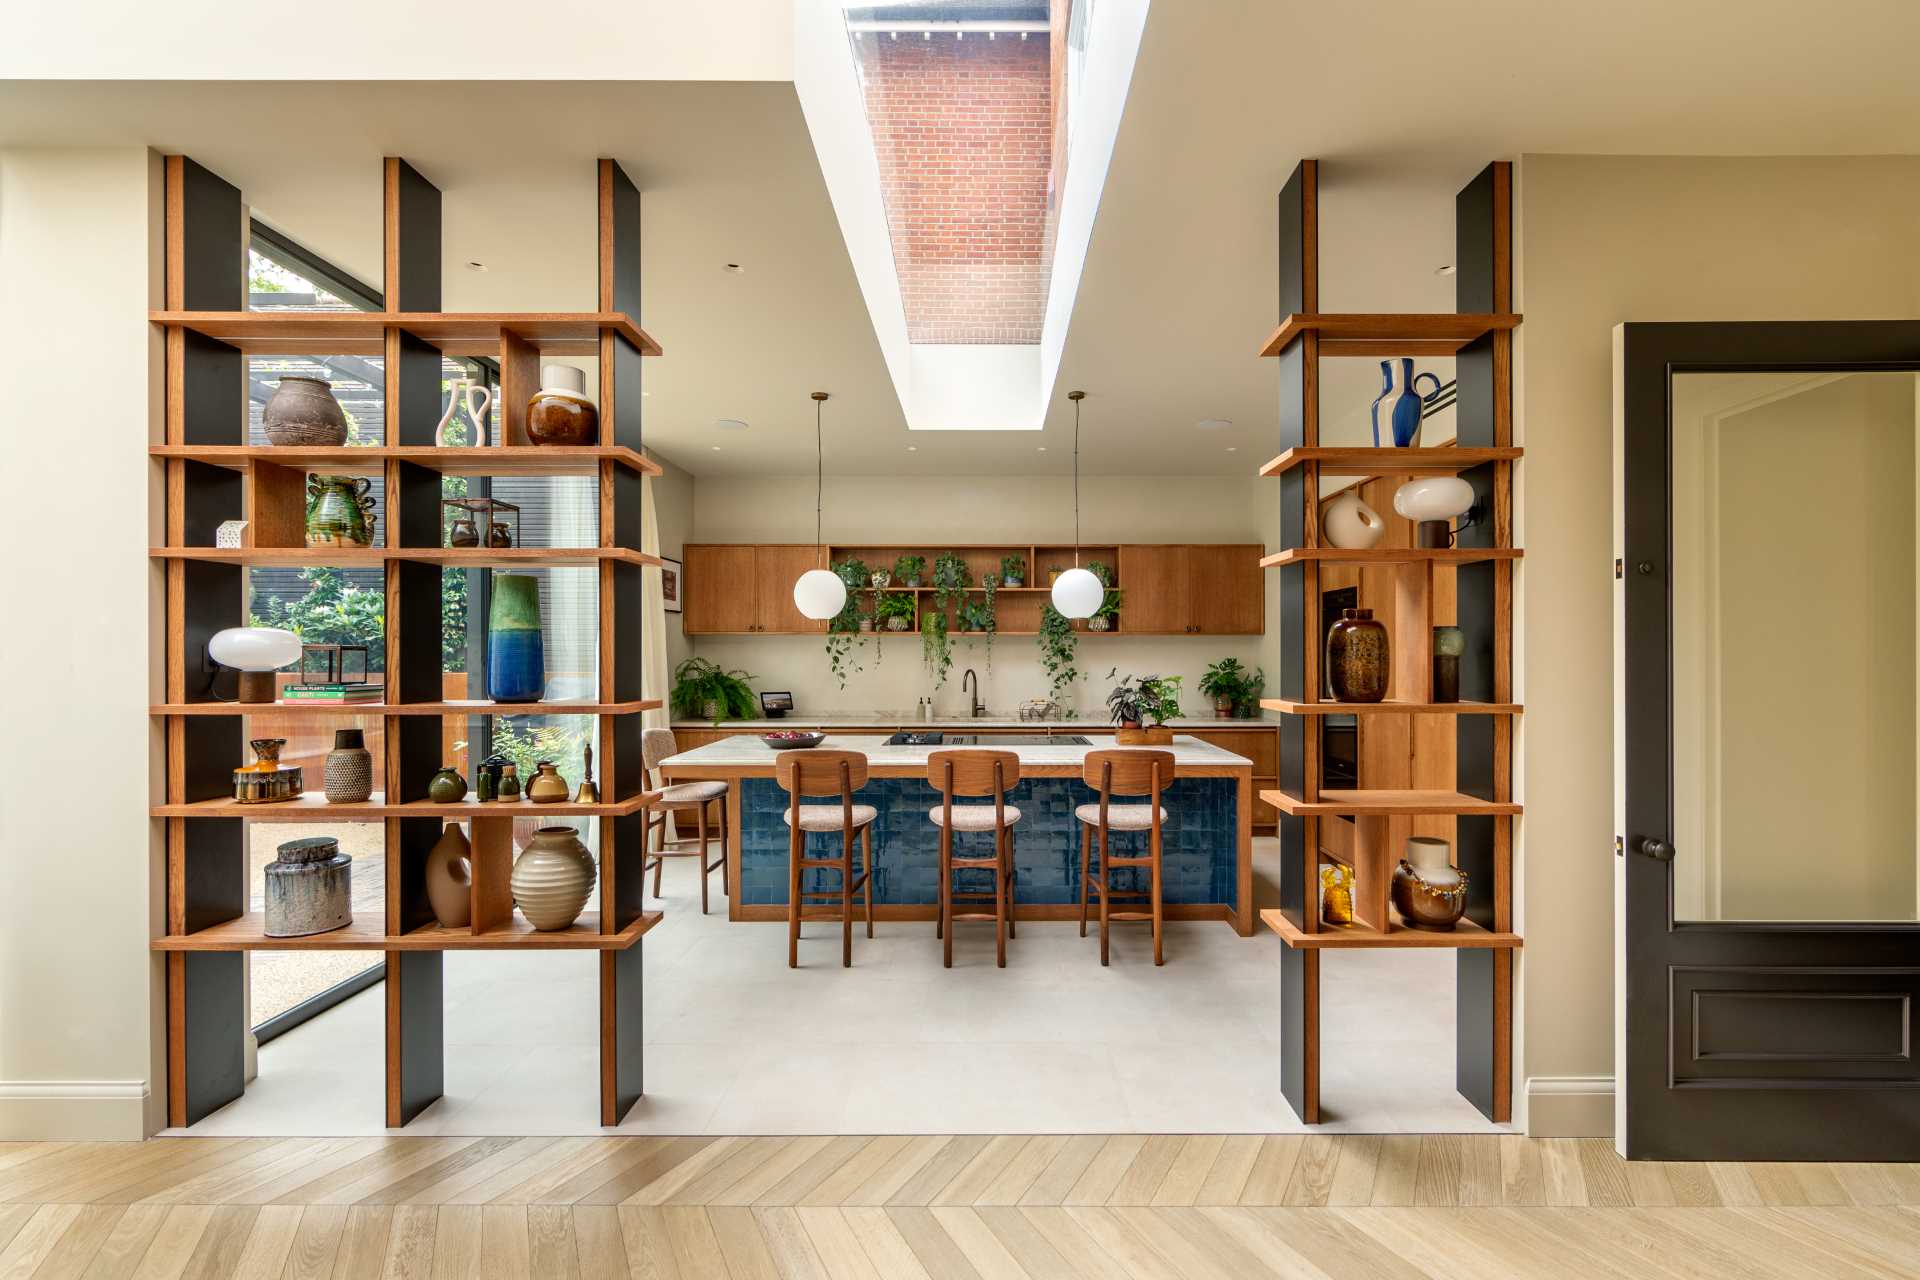 This dining room has views of the kitchen, while floor-to-ceiling bookshelves create an entryway for the kitchen.